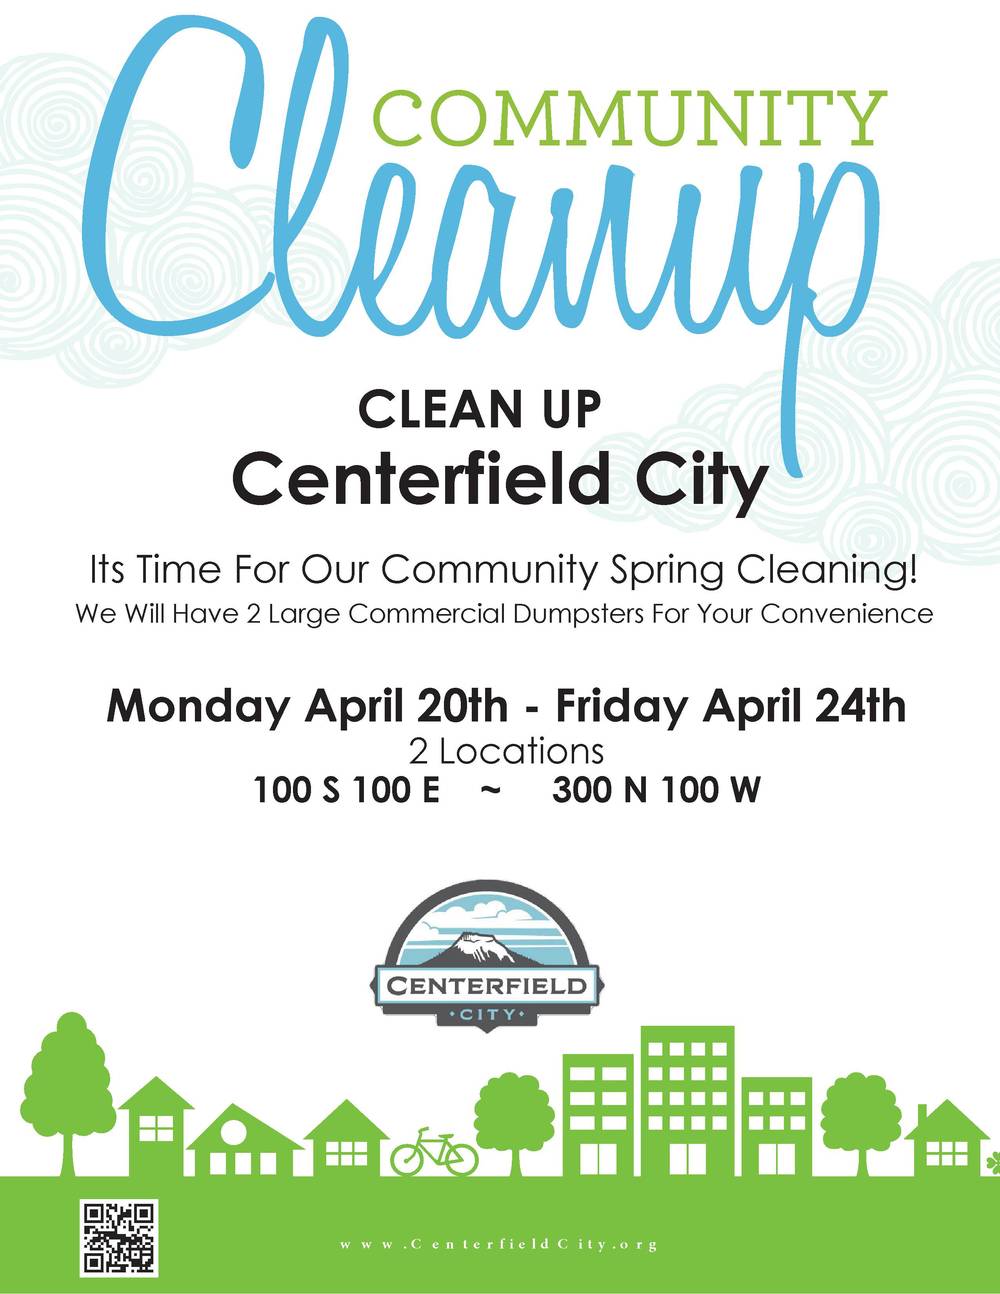 community-cleanup-centerfield-city